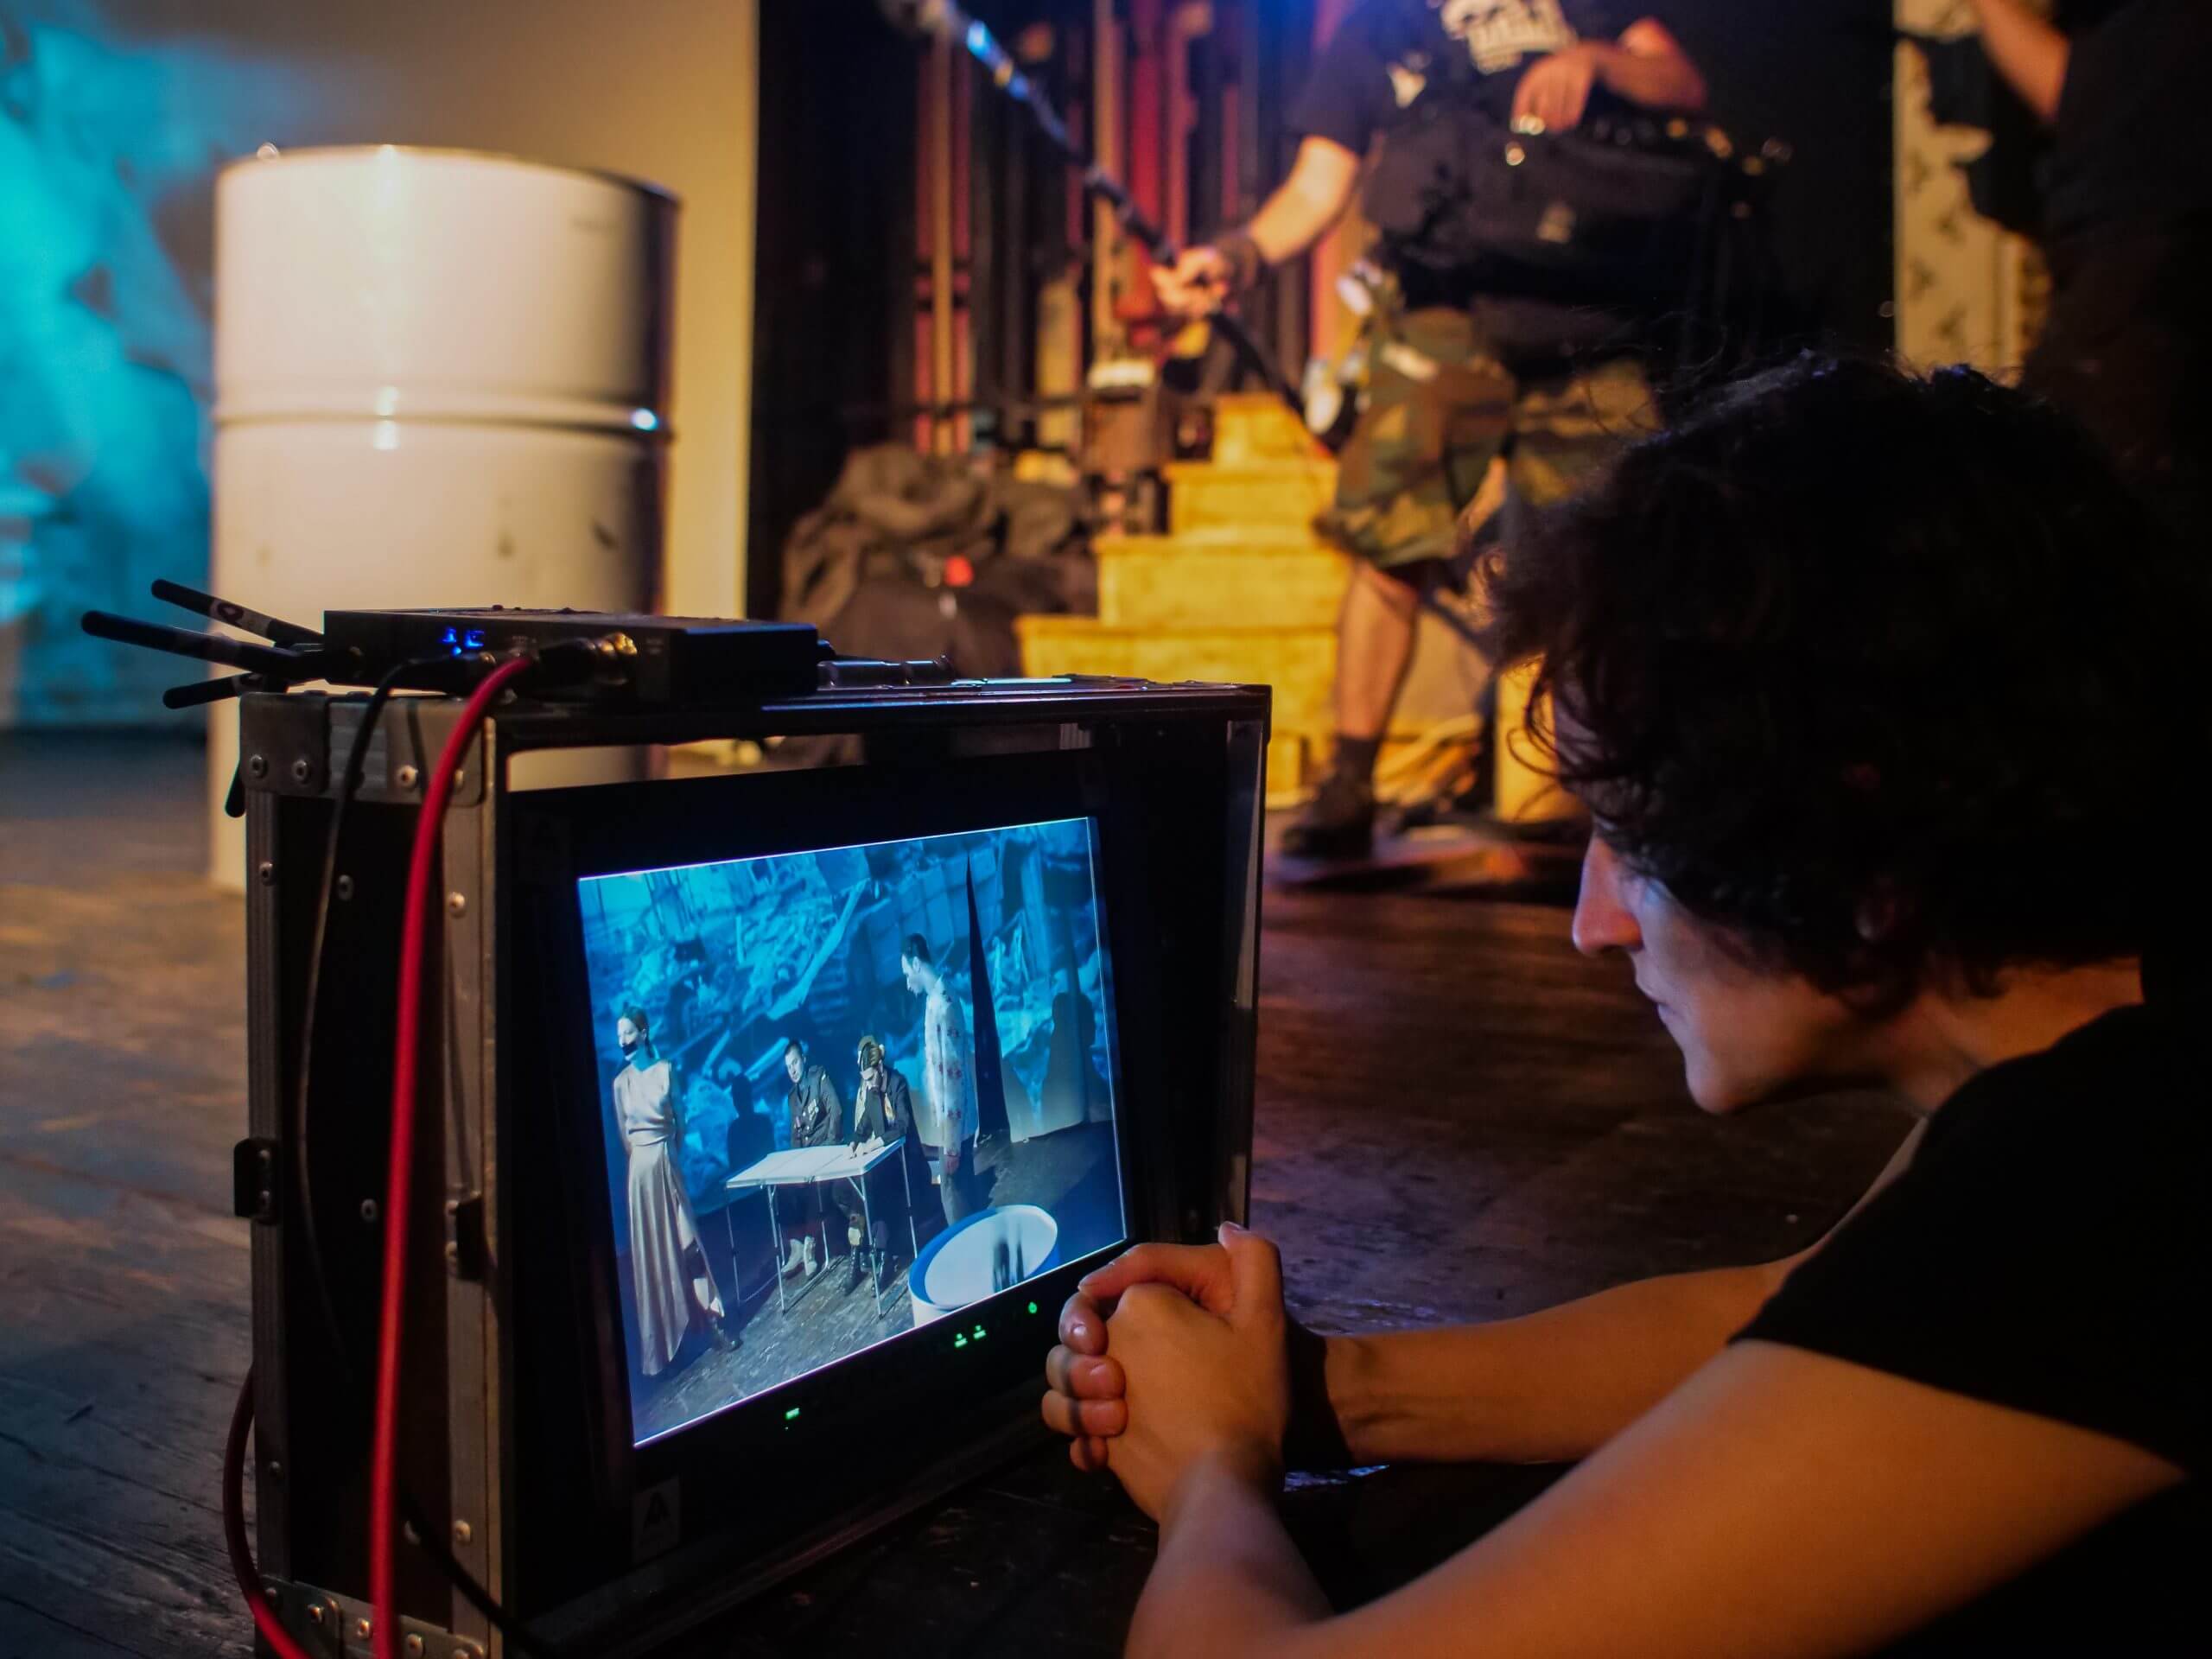 Production still. Elwira Niewiera watches a monitor of a scene that she is shooting. A man holding a boom mic is seen in the background.